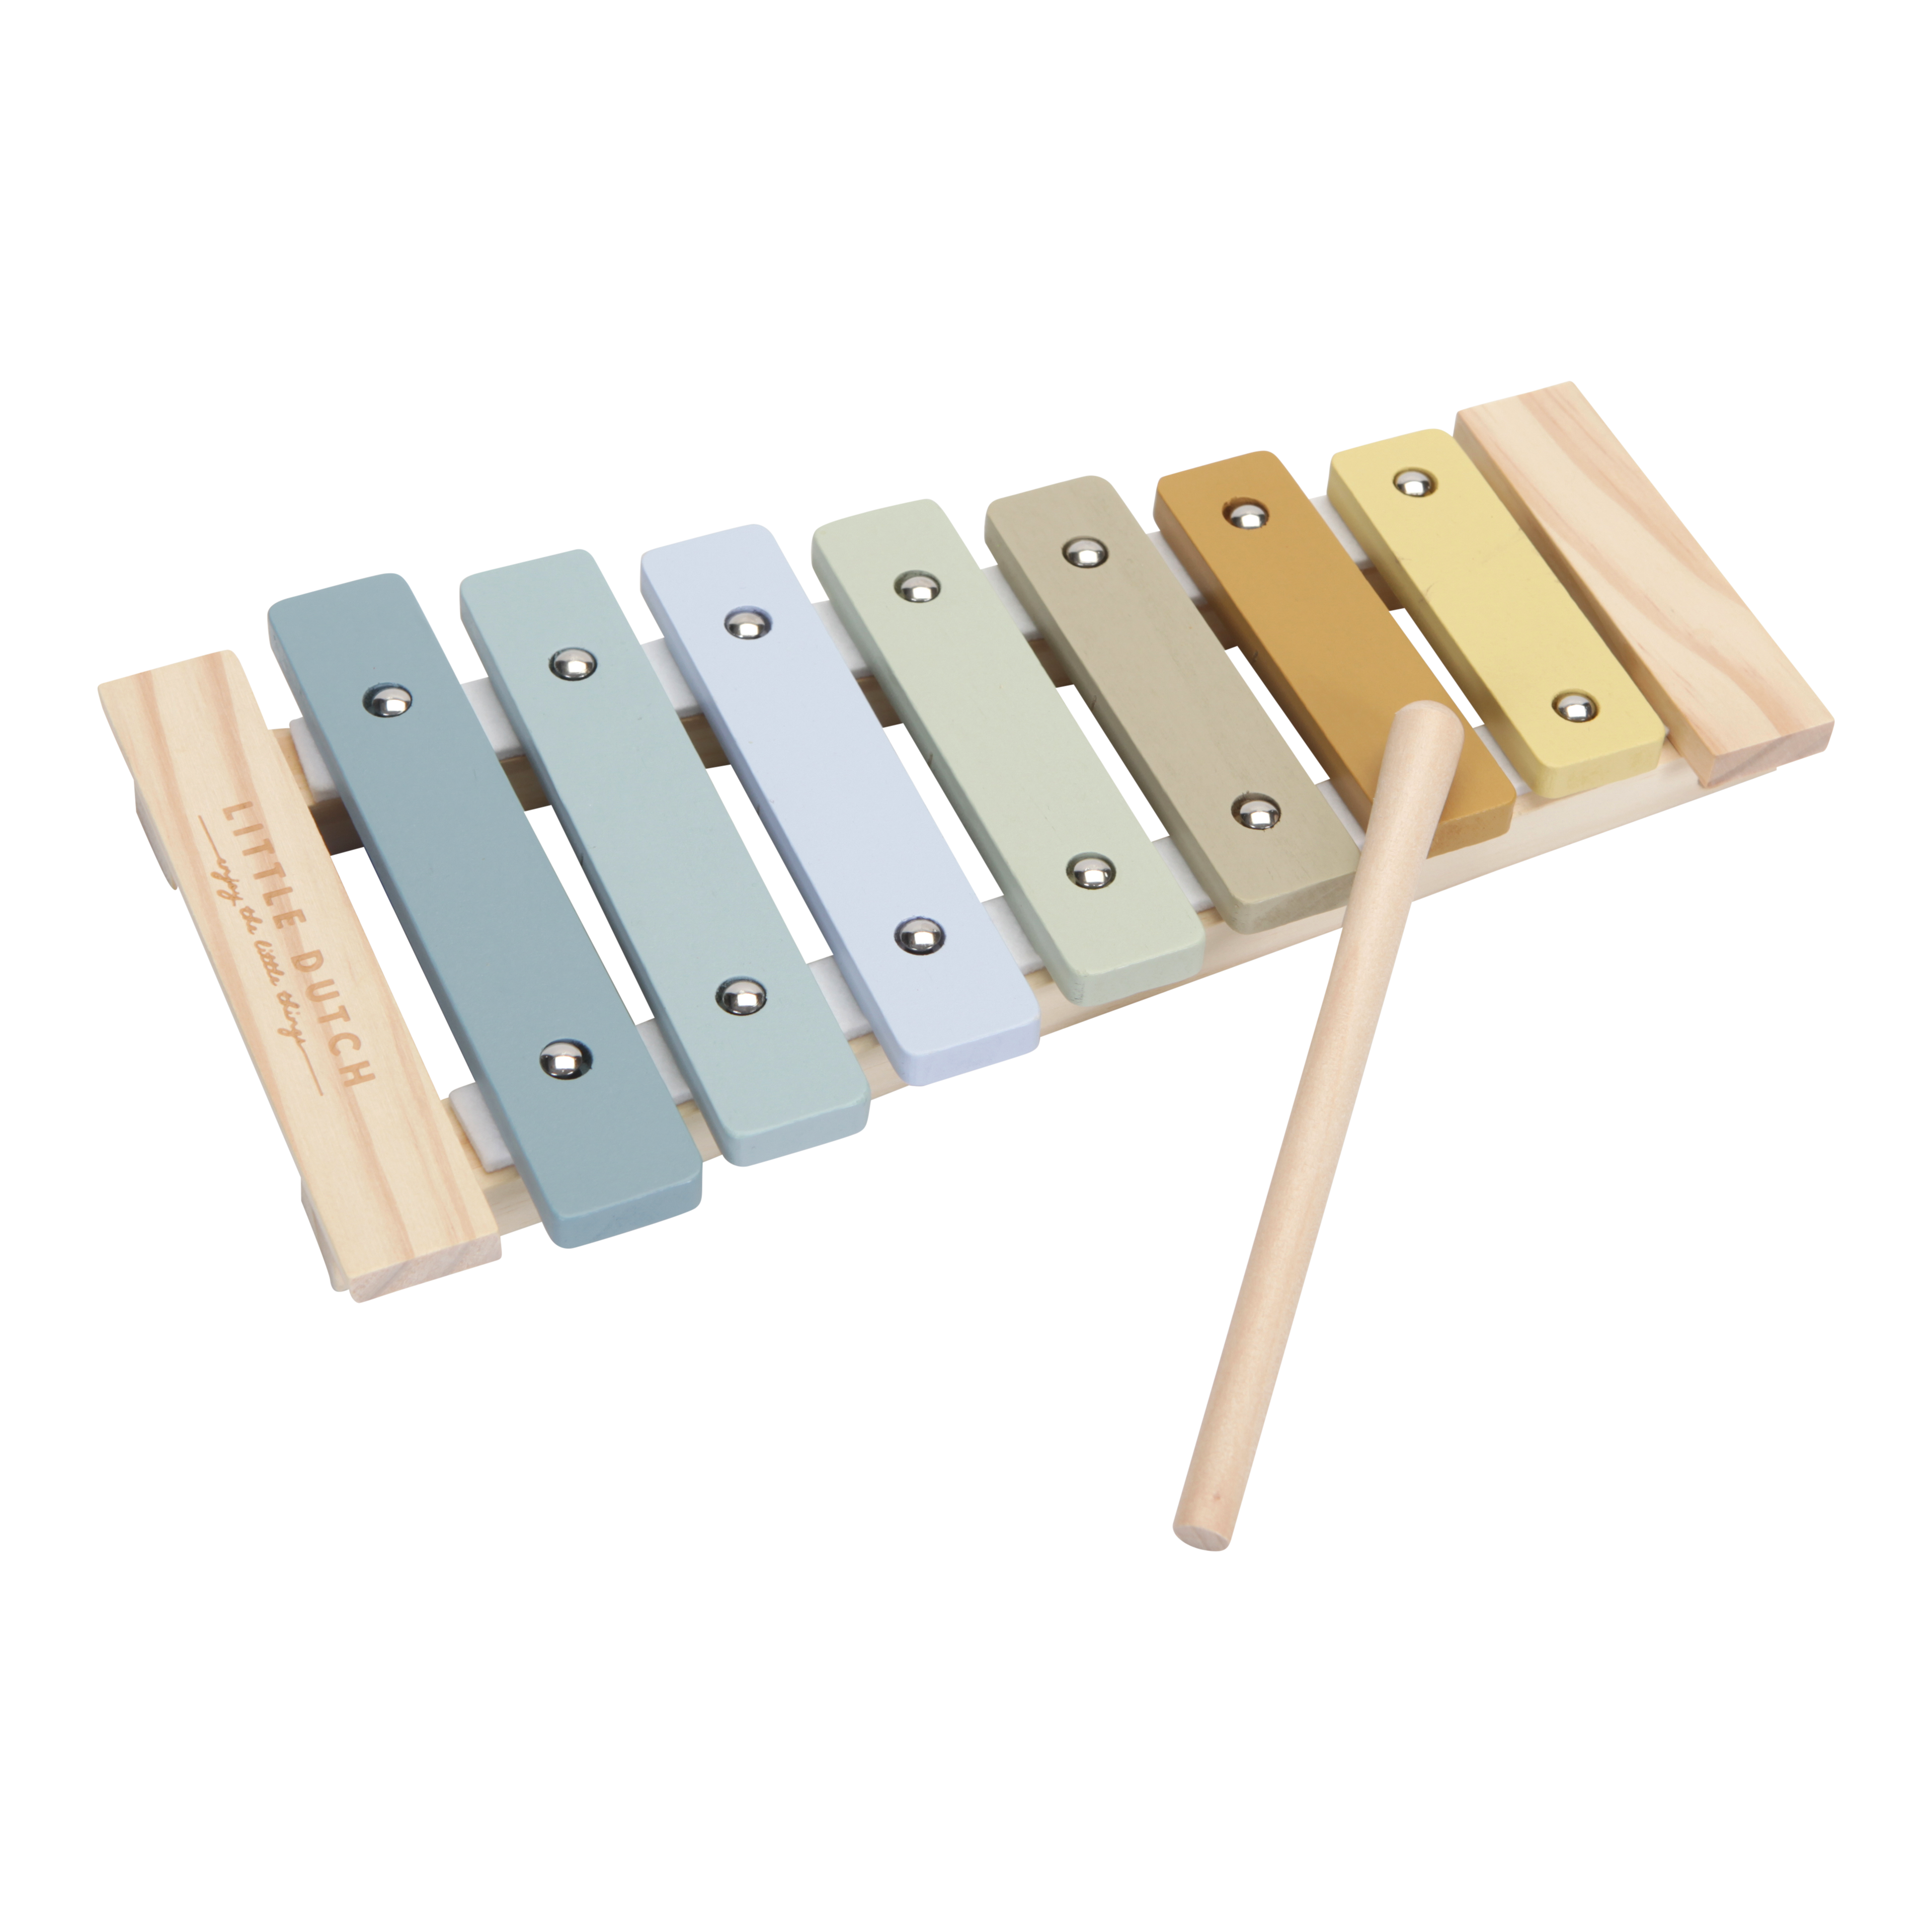 Wooden Xylophone - Blue